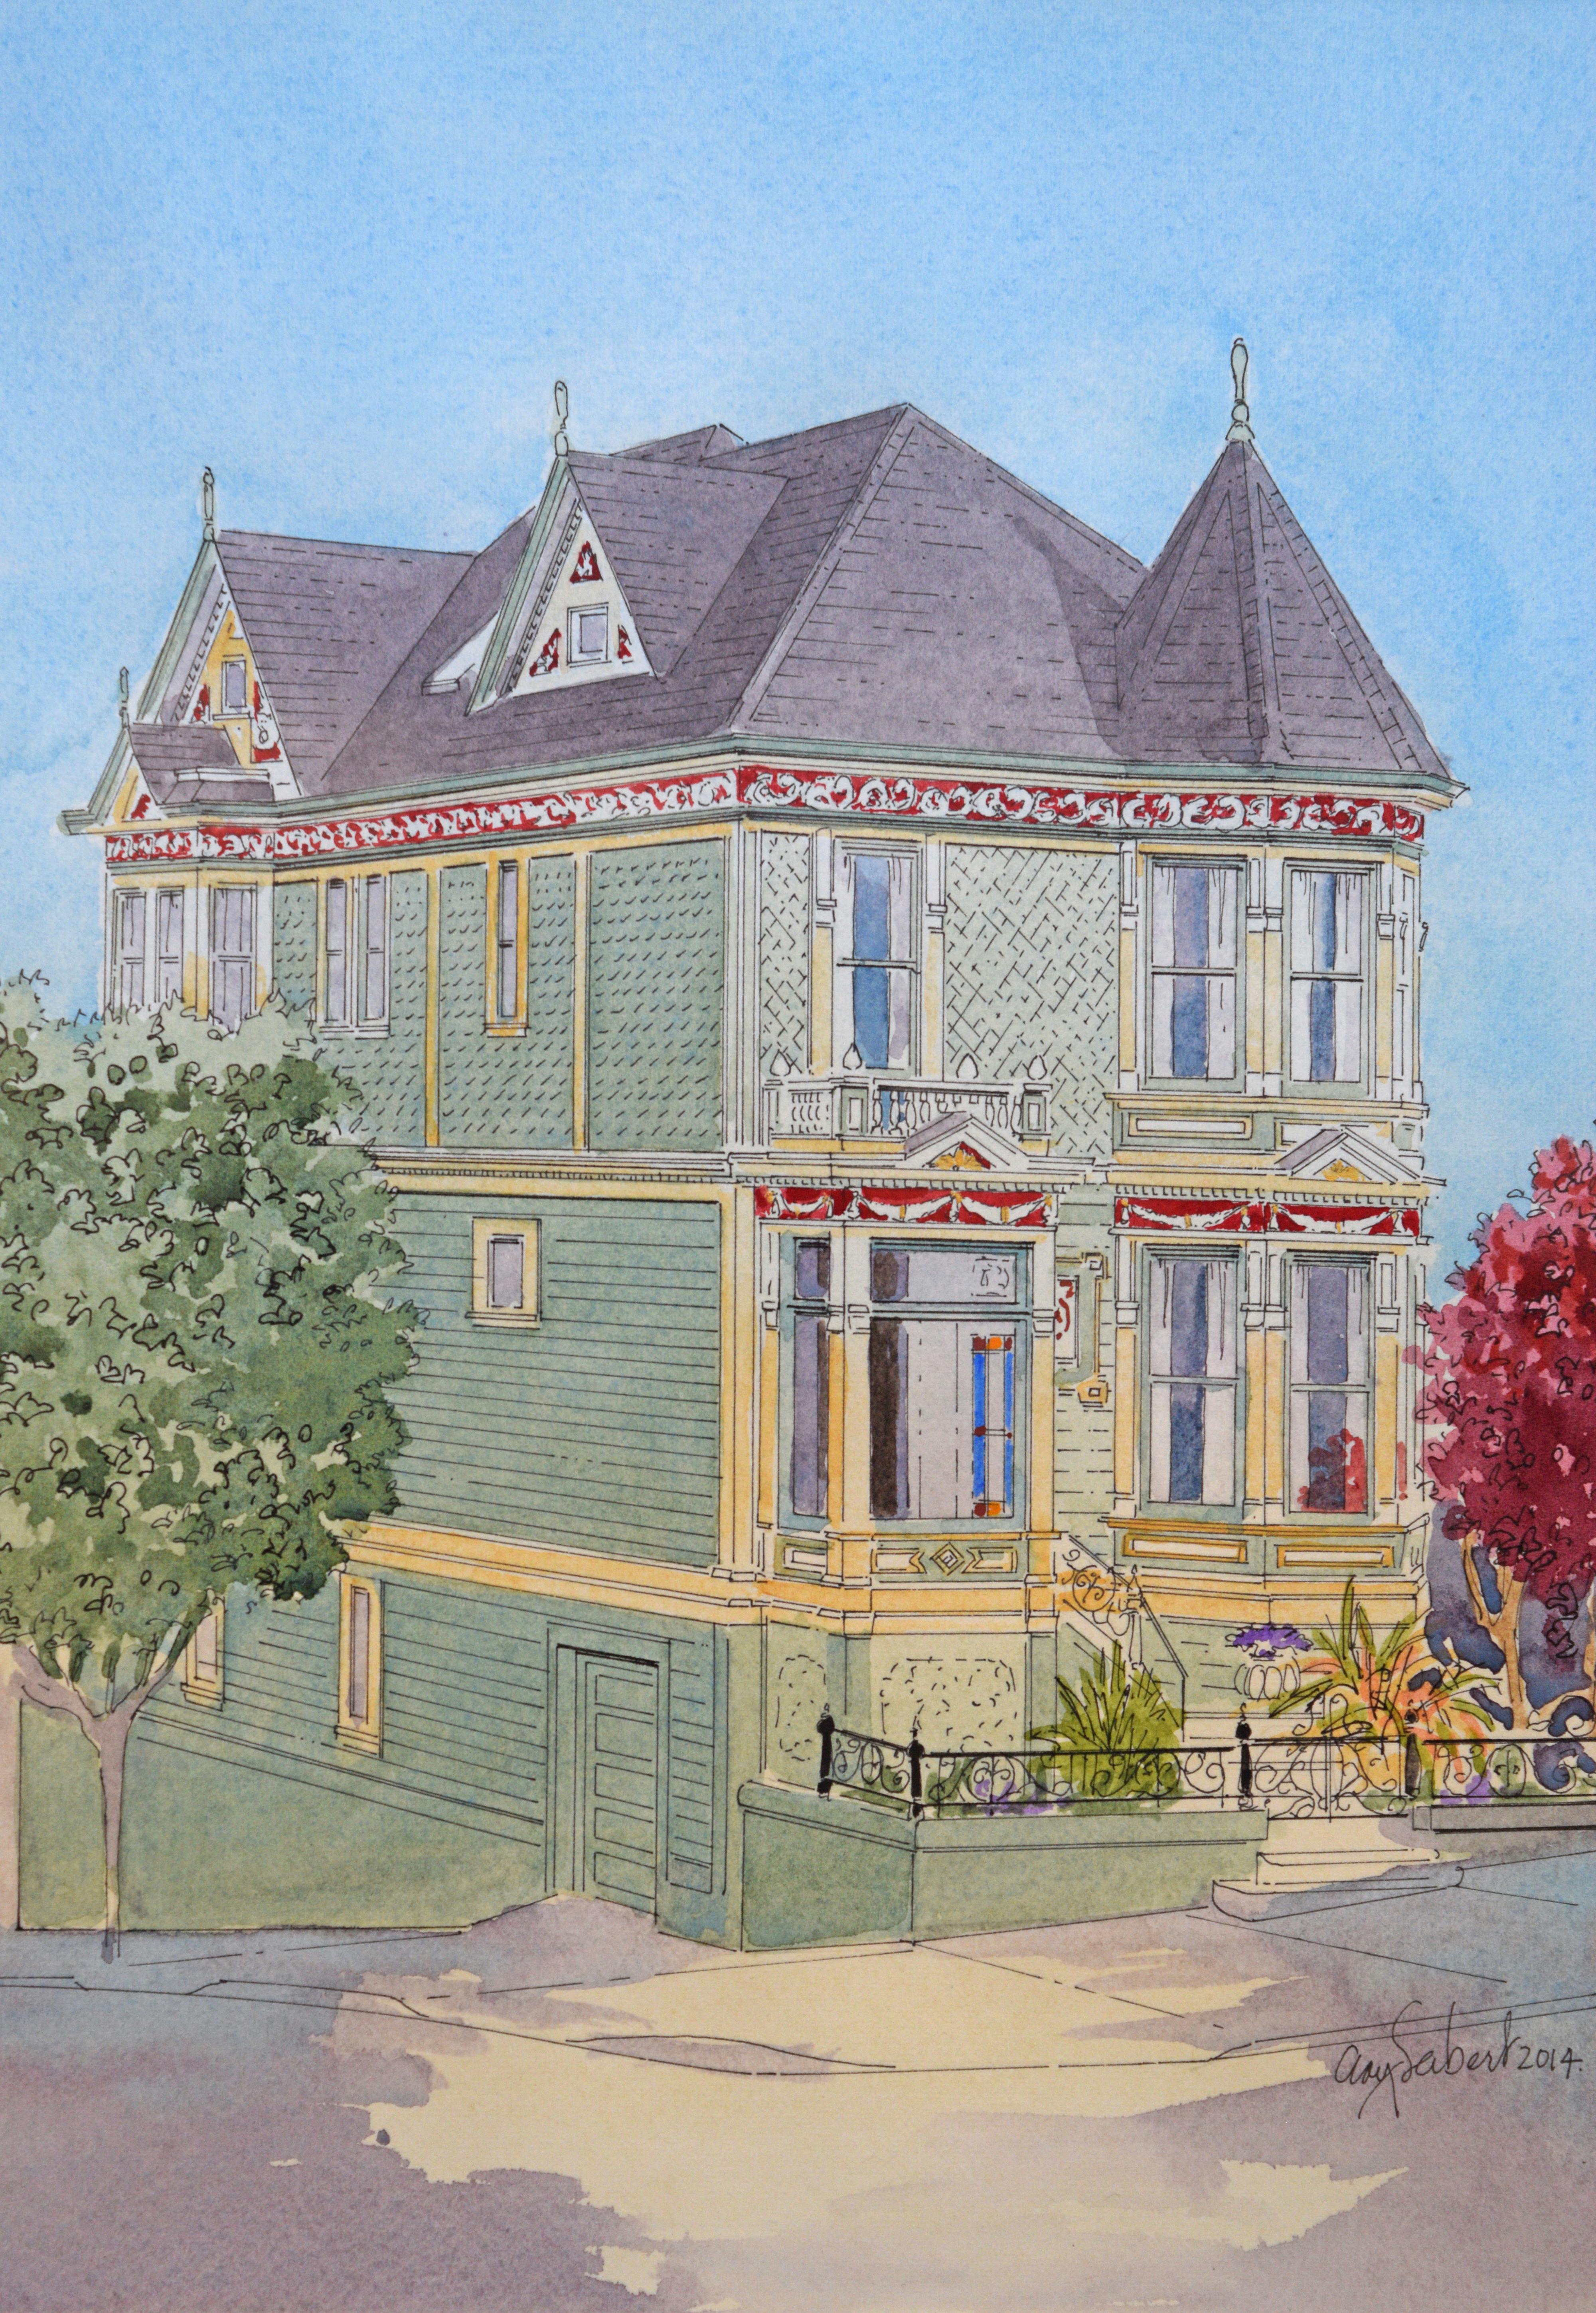 Historic Painted lady in San Francisco